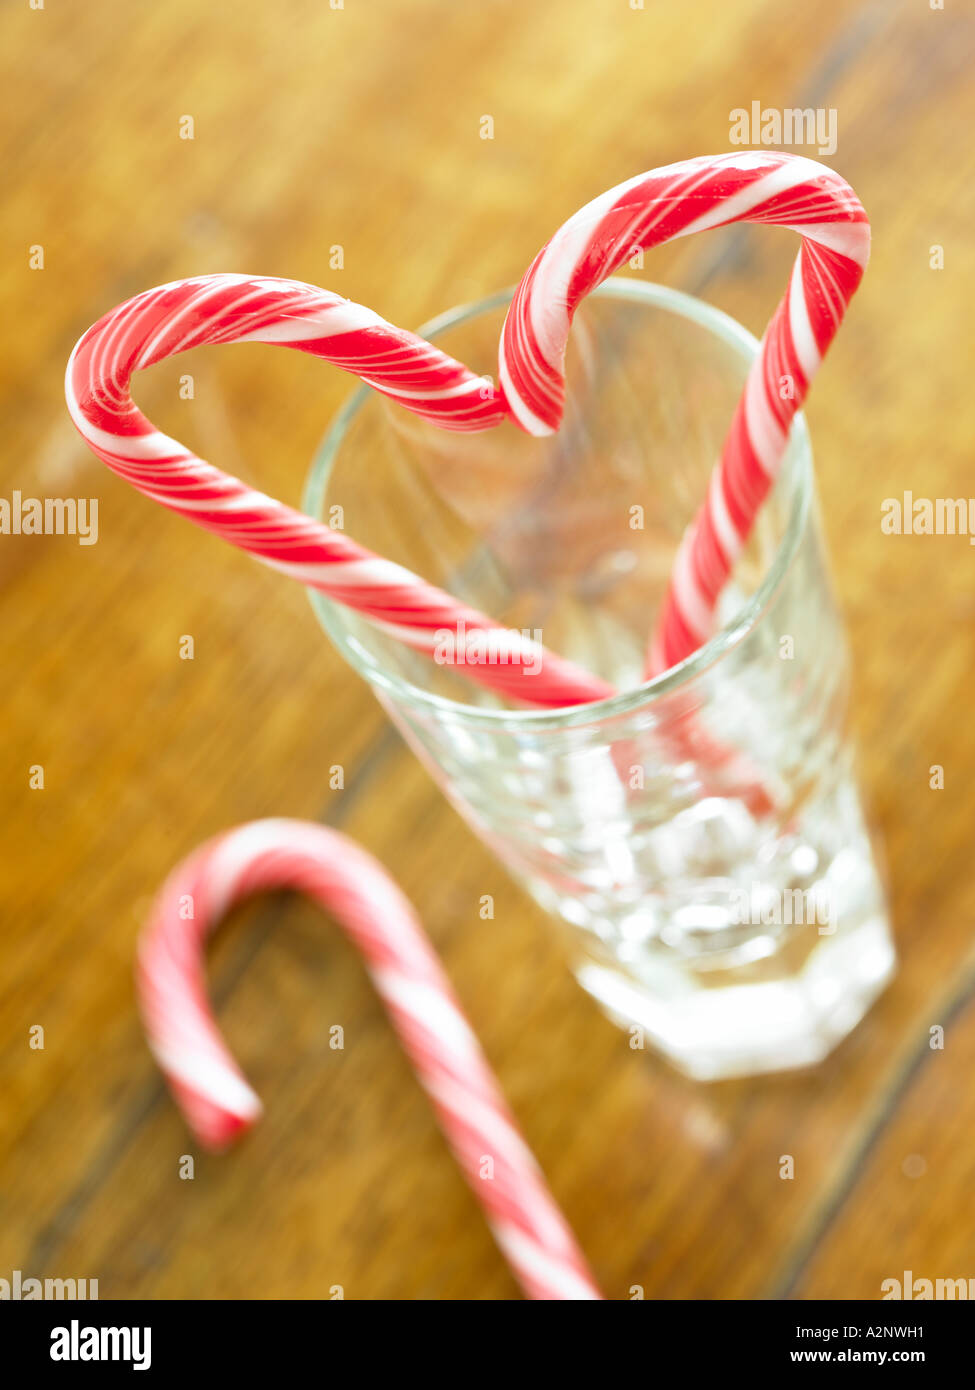 red and white candy cane sticks making a symbol of a hart shape in a glass tumbler Stock Photo